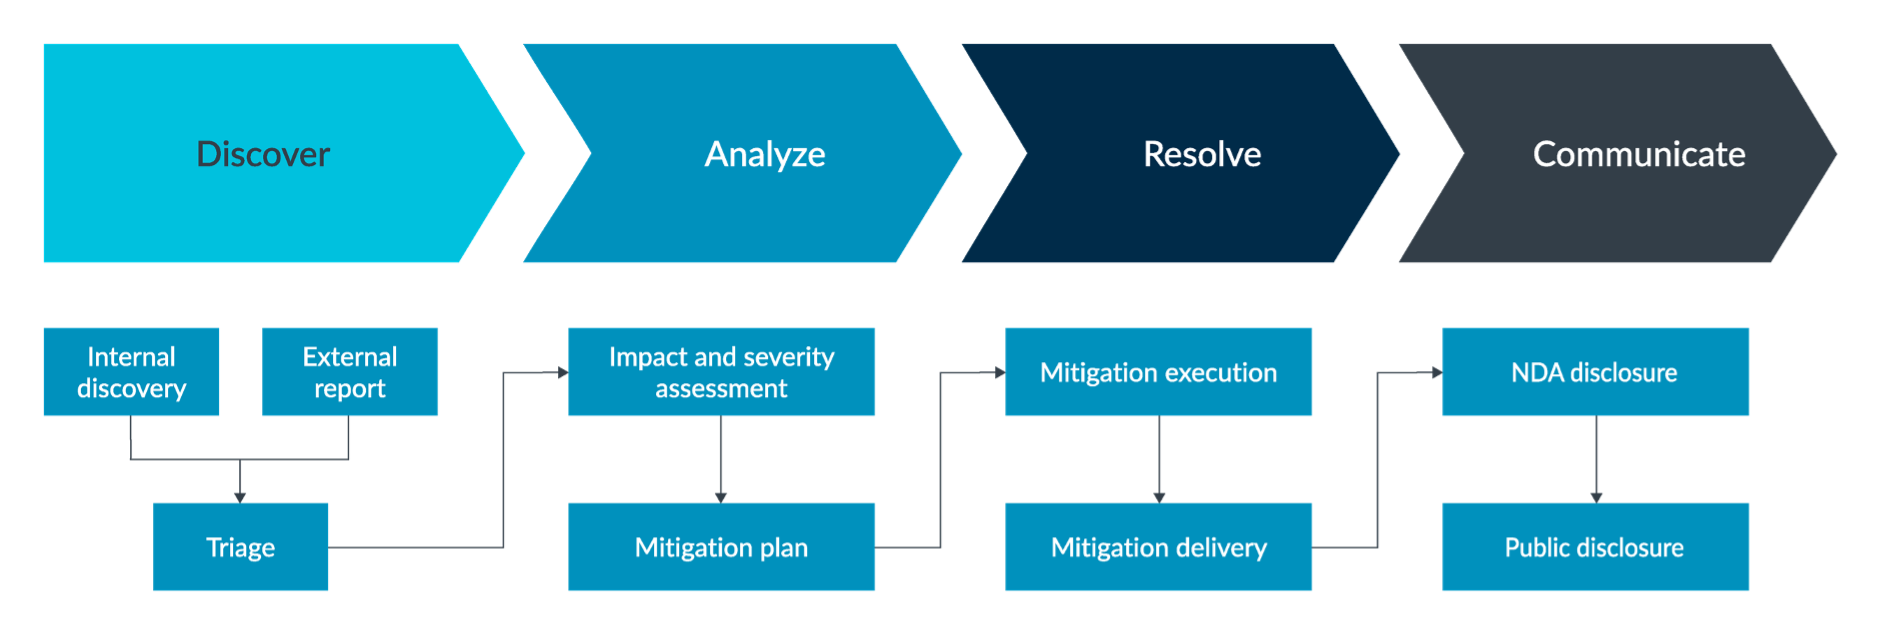 Product Security Incident Response Process Infographic